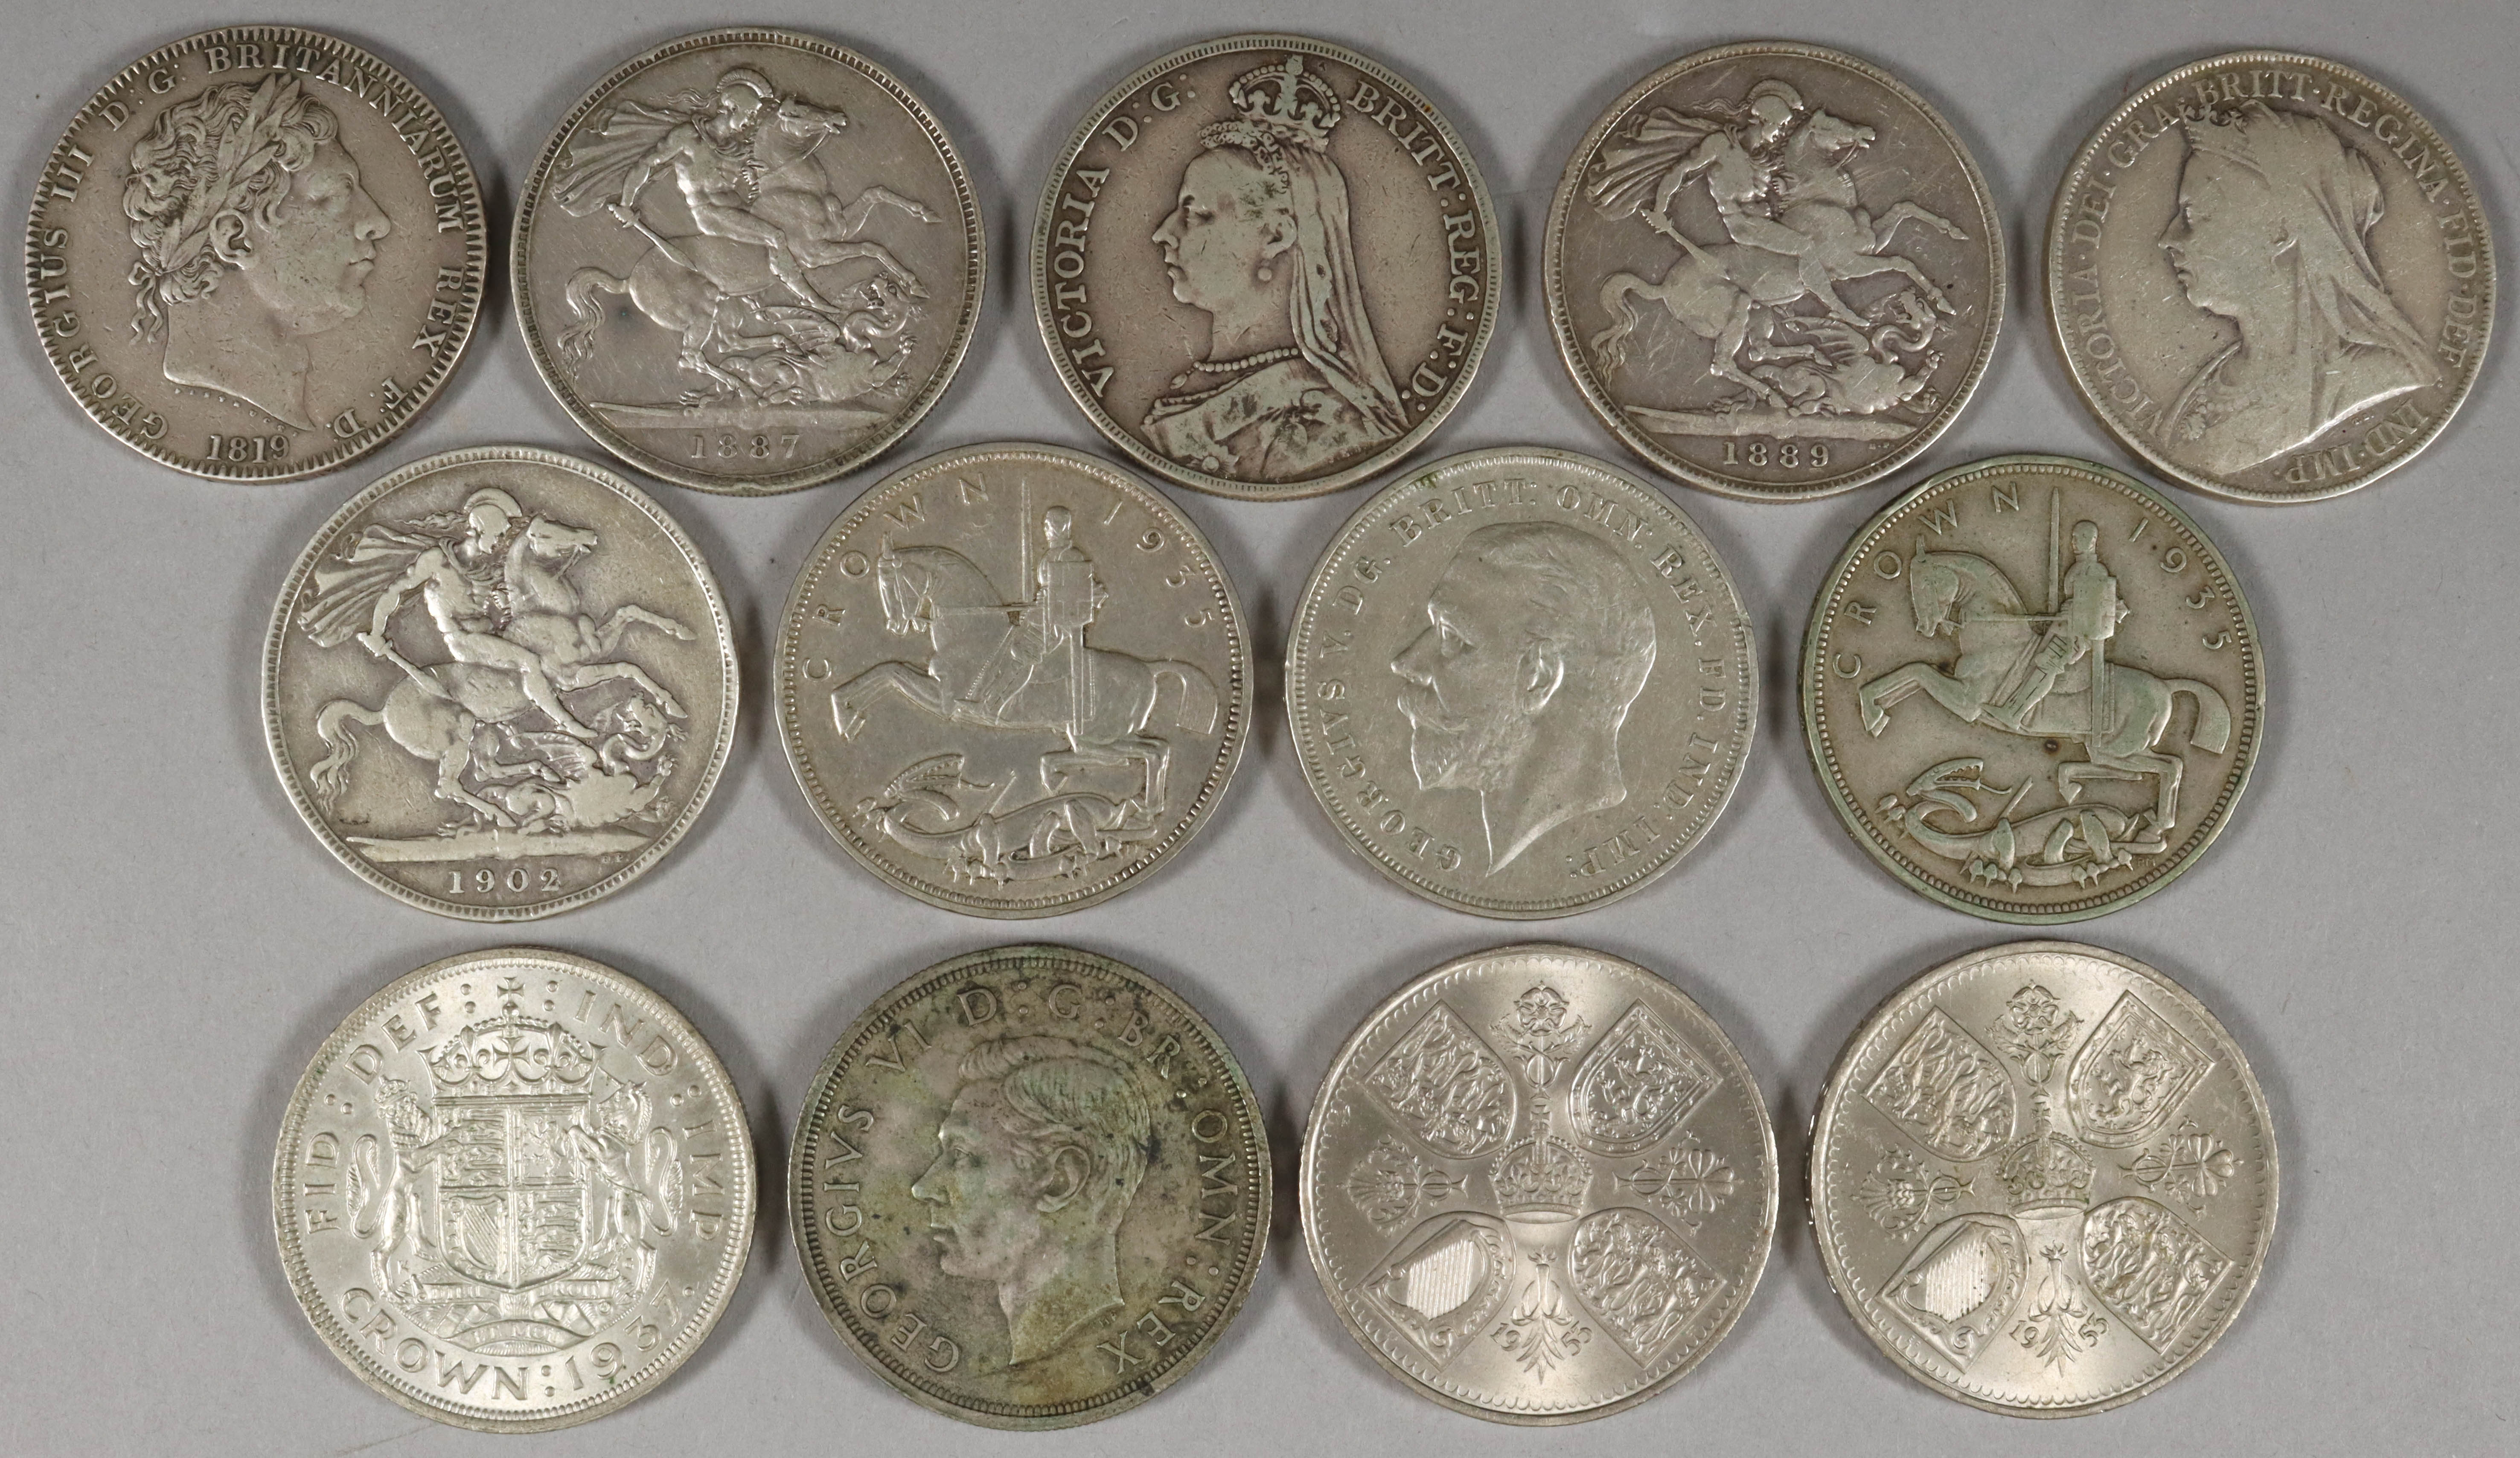 A Collection of Thirteen Crowns - George III 1819 (fair/fine), Victoria 1887, 1889, 1892 and 1899 (